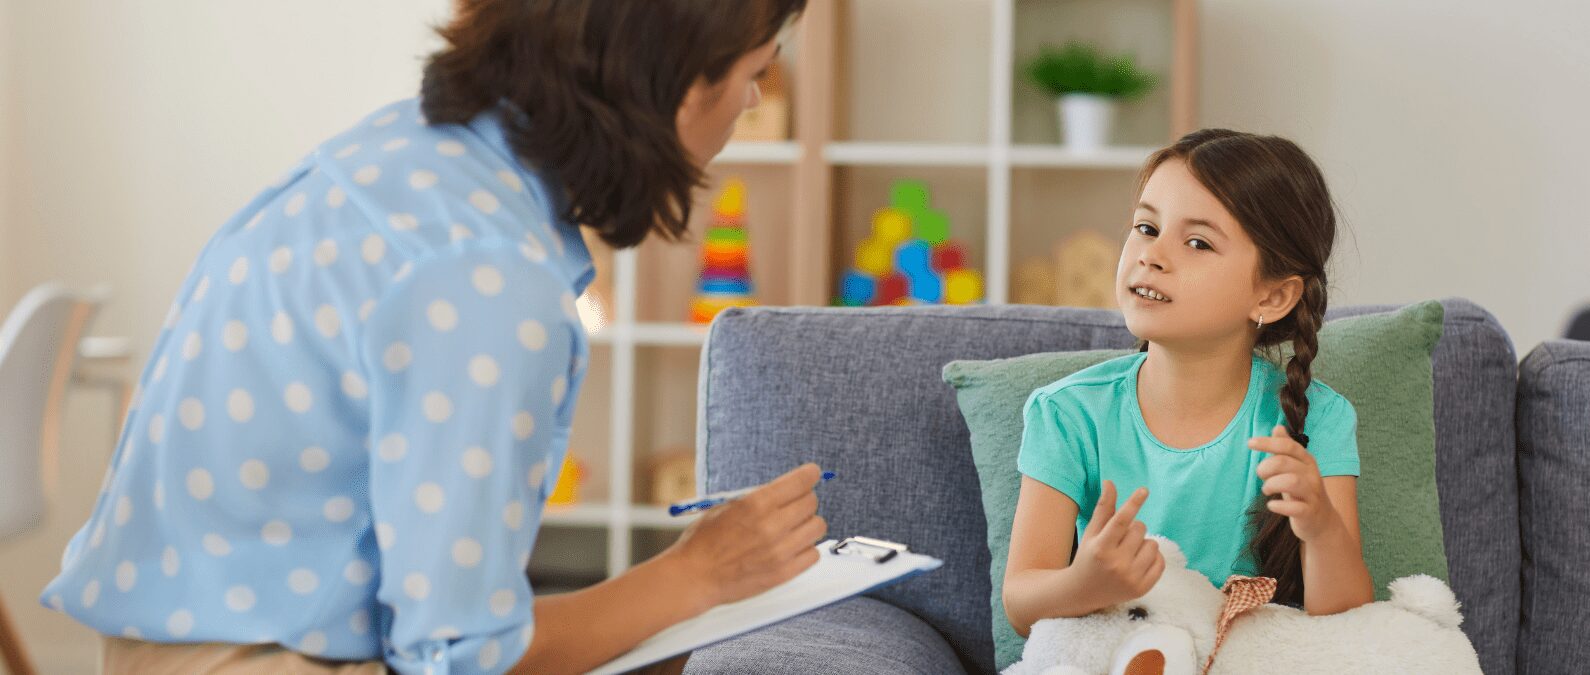 screening for ADHD in children with a healthcare professional, doctor or psychologist